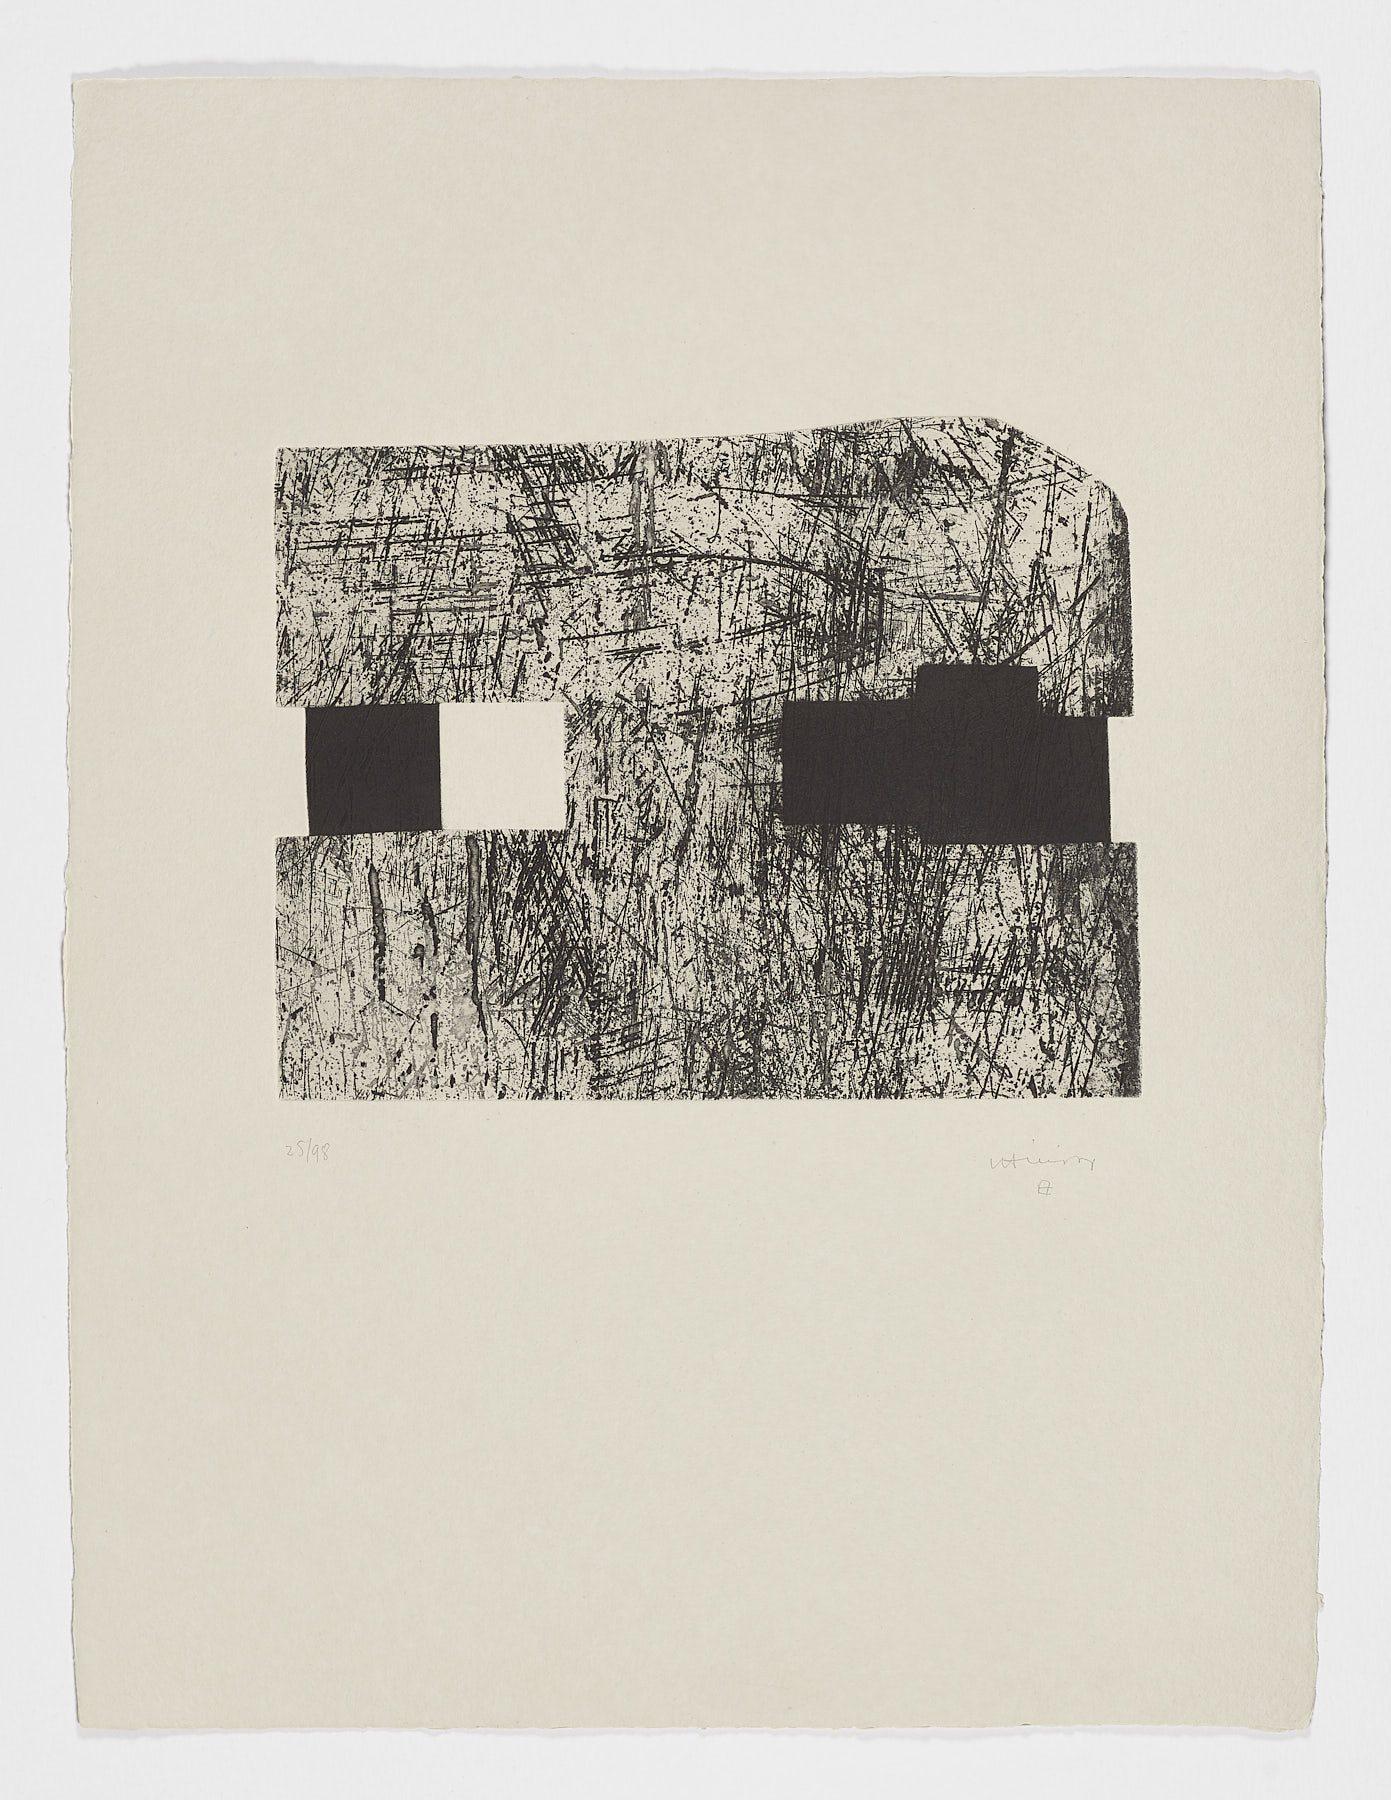 What is Eduardo Chillida inspired by?